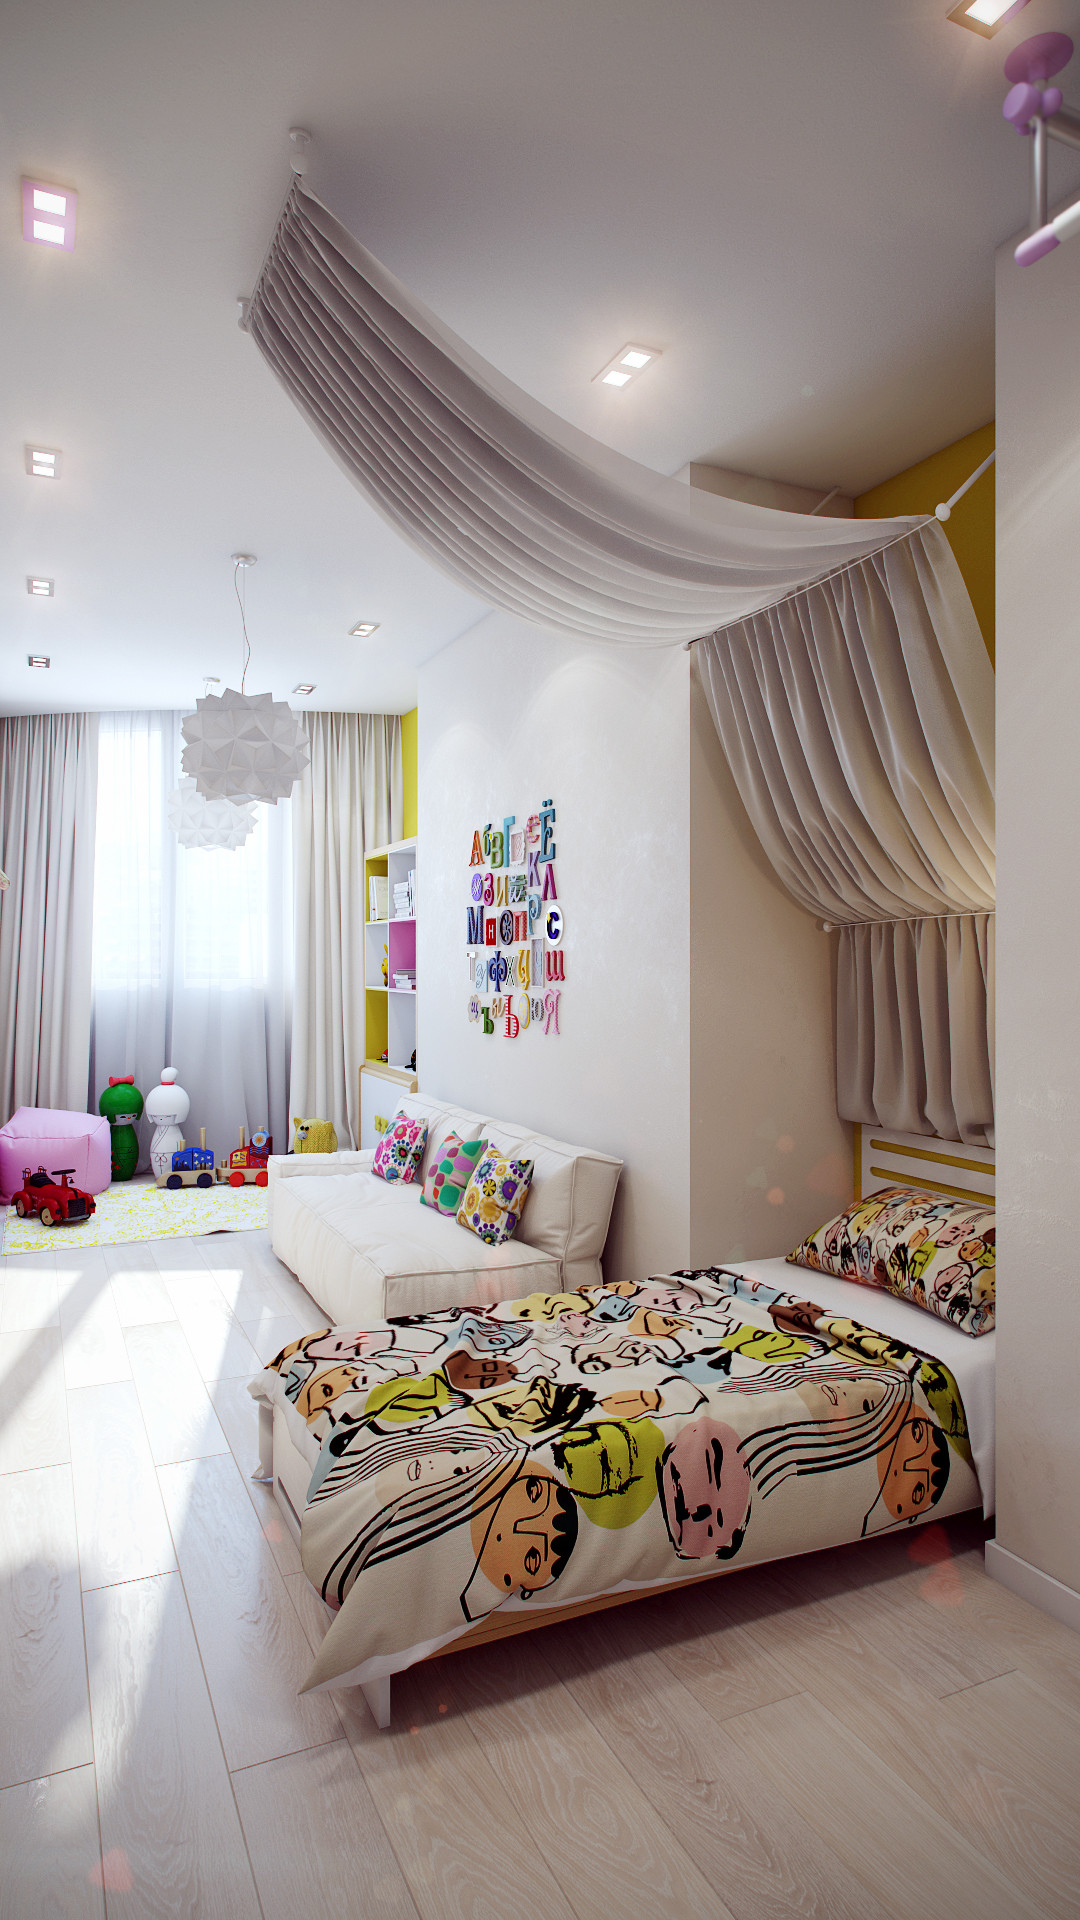 Pretty Bedroom Colors
 Attractive Girls Bedroom Decorating Ideas With Beautiful